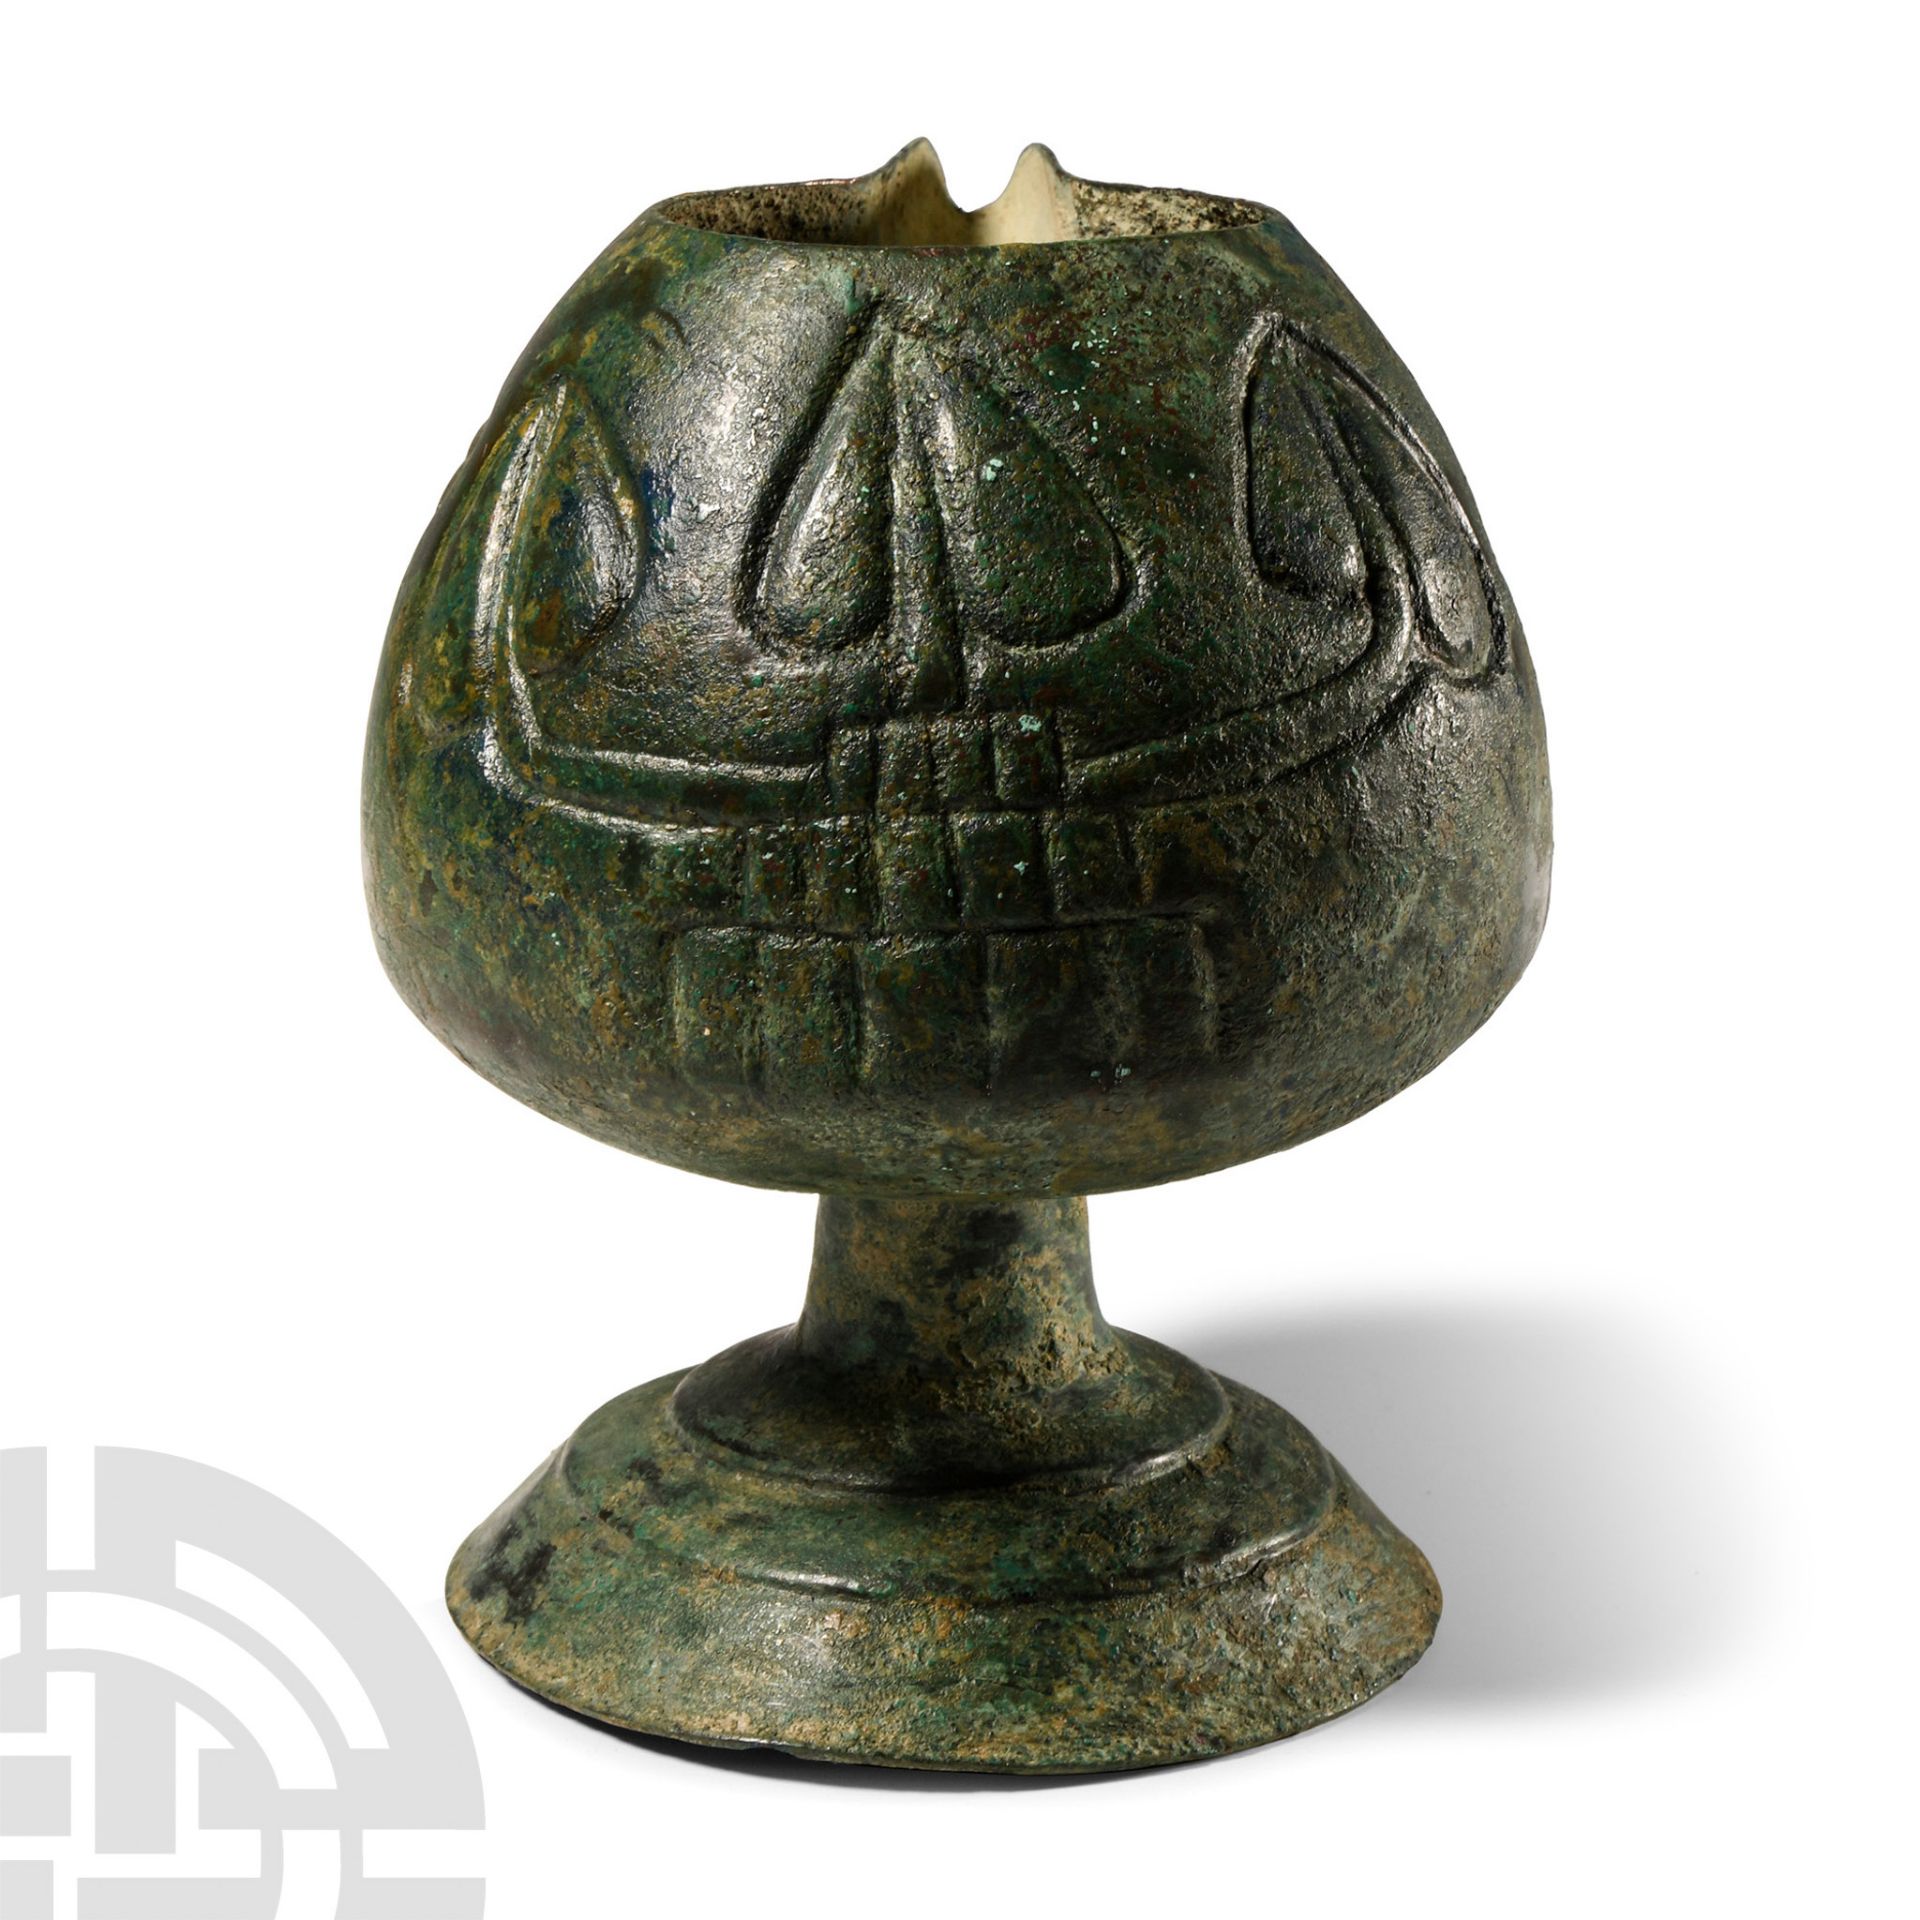 Elamite Spouted Vessel with Flowers